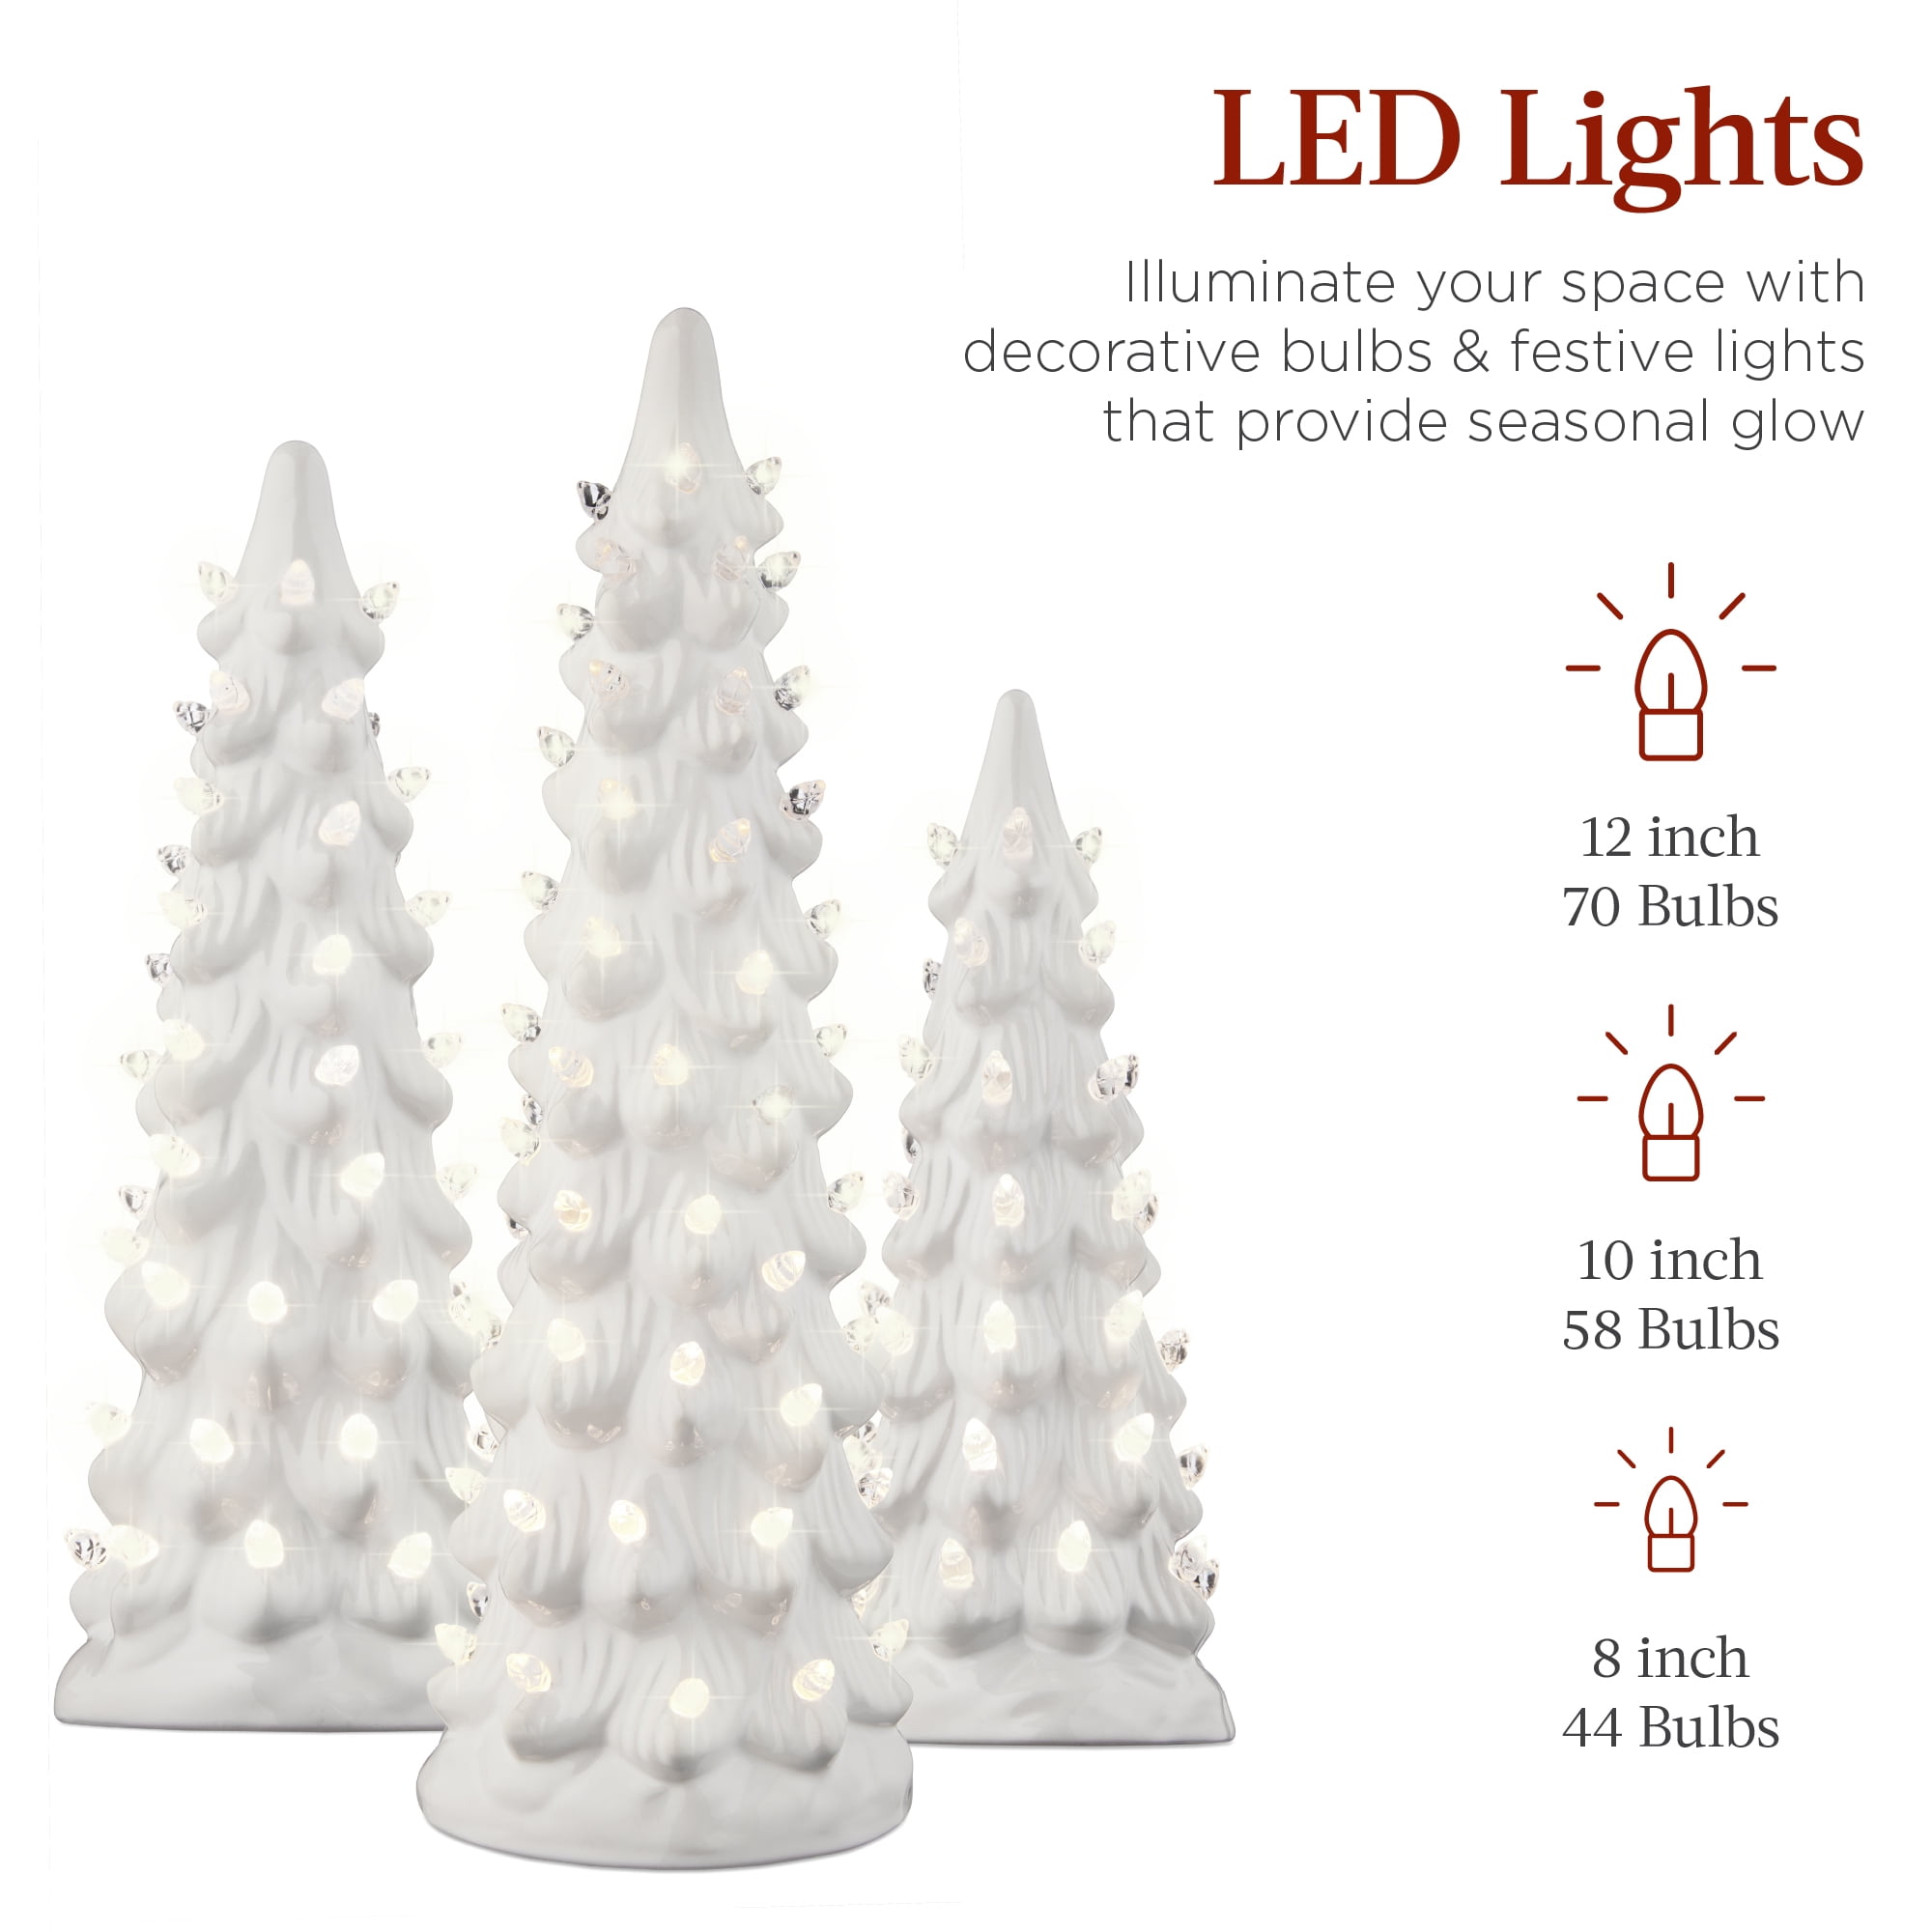 Best Choice Products 18in Ceramic Christmas Tree, Pre-Lit Hand-Painted Holiday Decor w/ 93 Warm White Bulbs - White